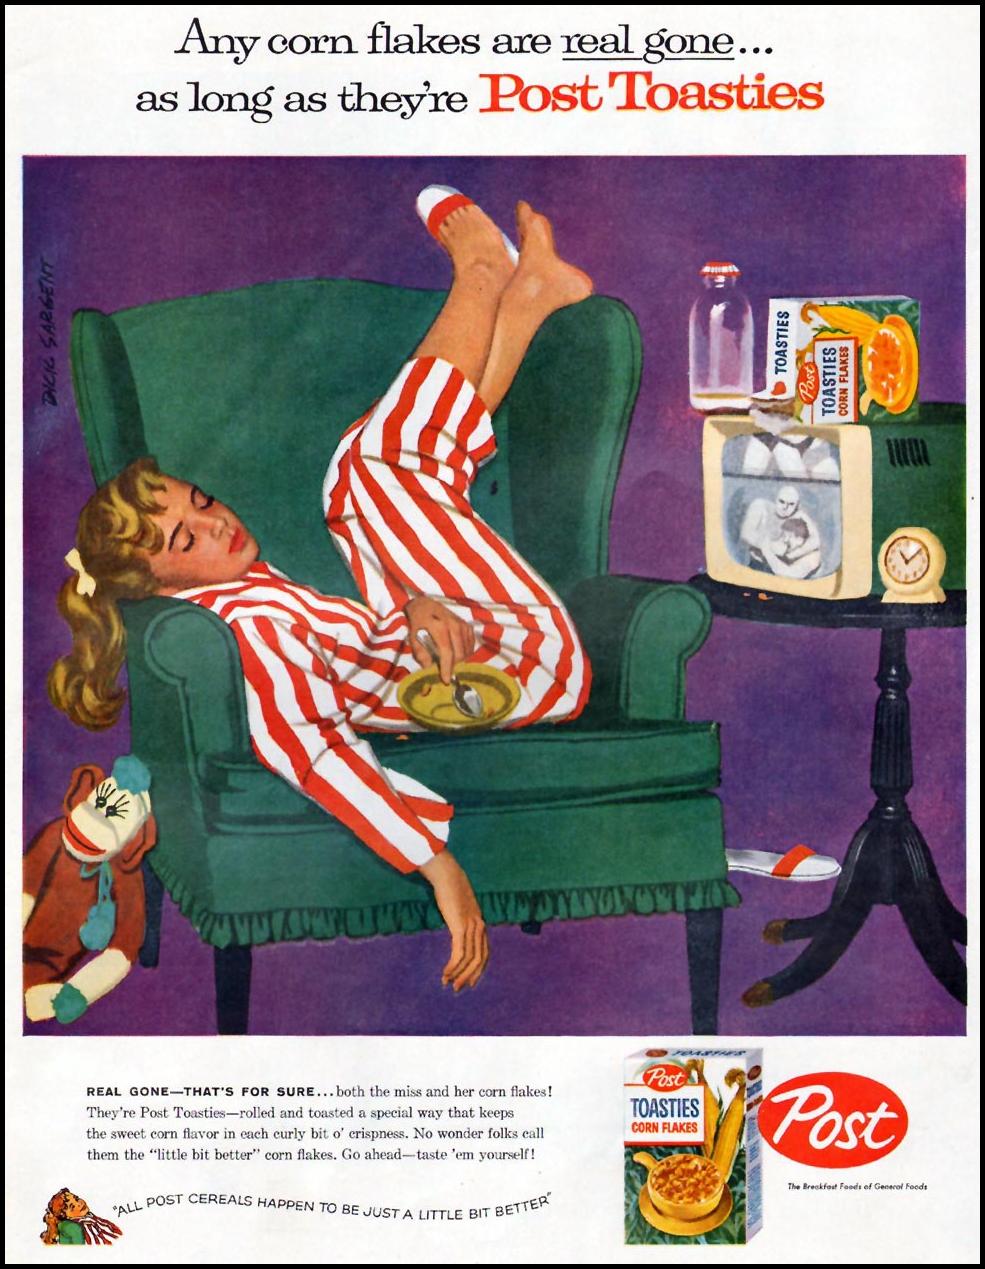 POST TOASTIES CEREAL
LIFE
09/09/1957
p. 38